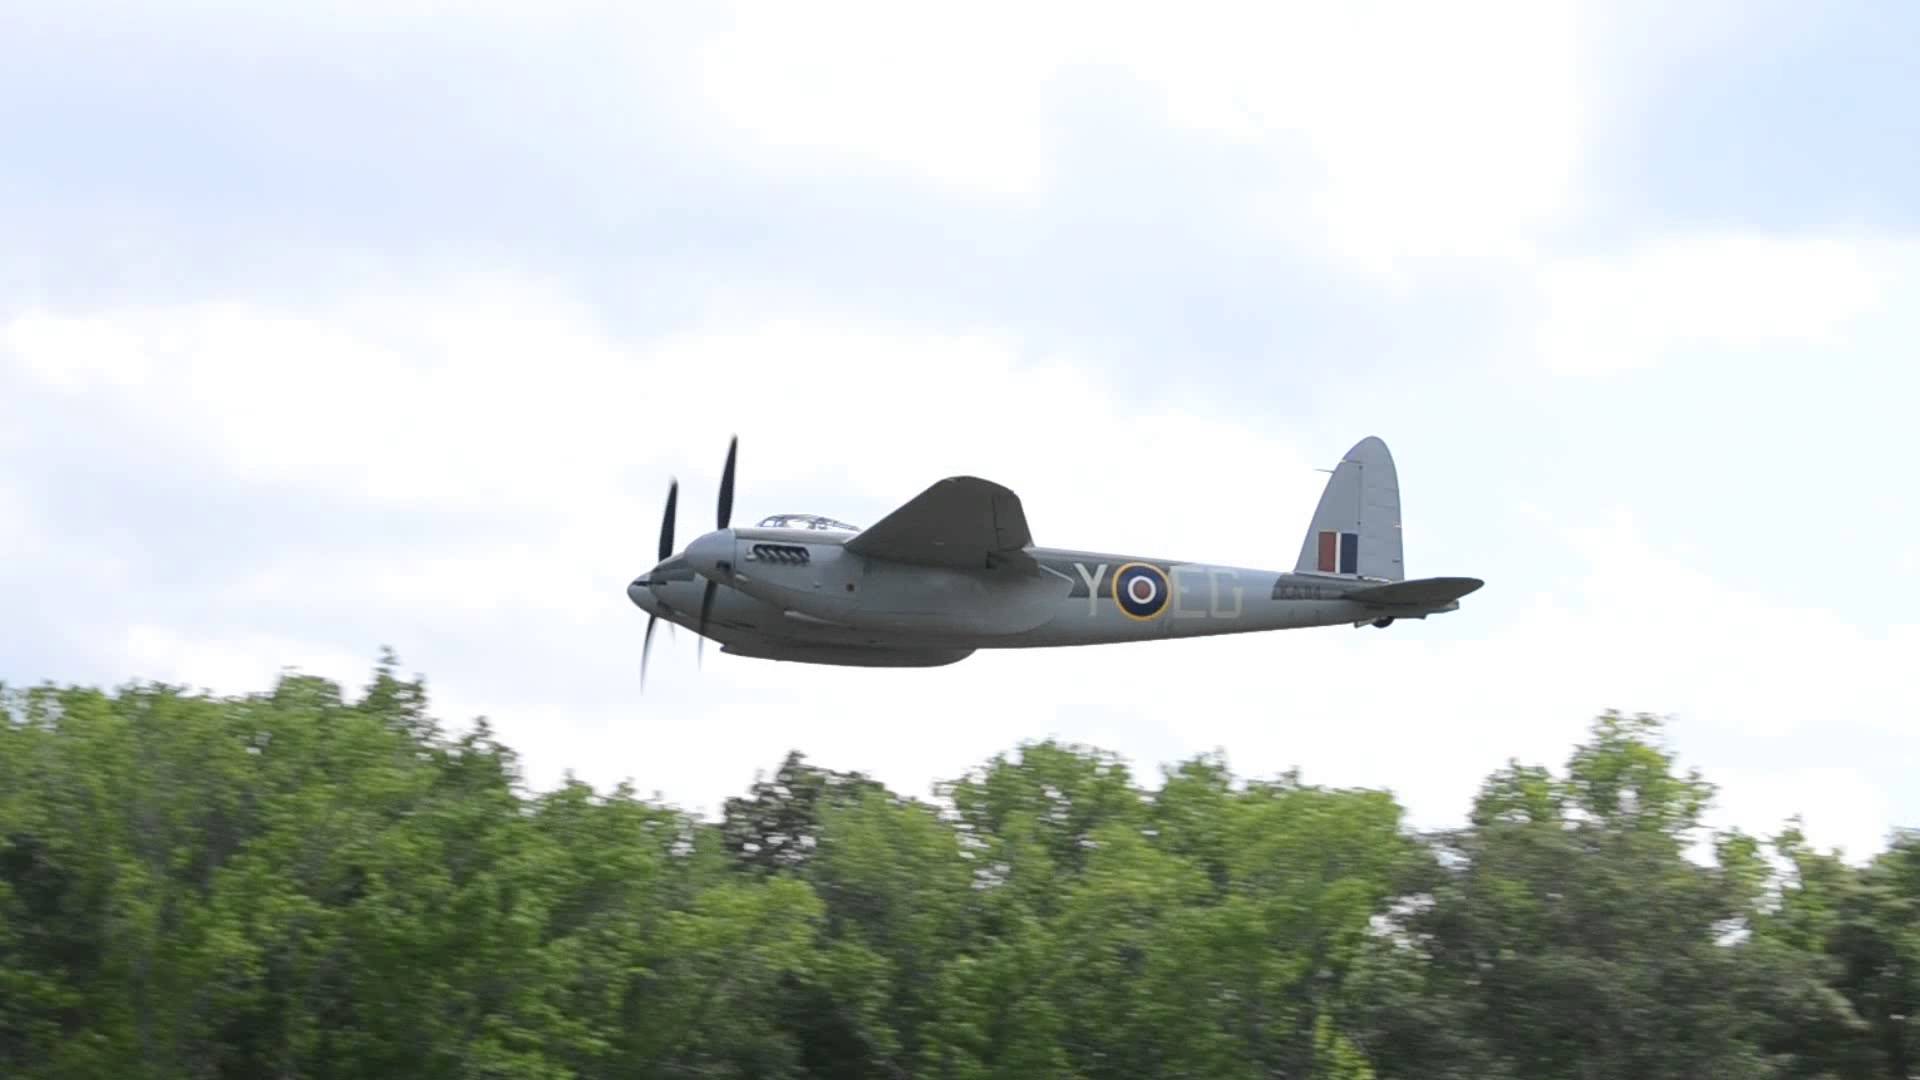 De Havilland DH 98 Mosquito Low Flyby 2014 Warbirds Over The Beach